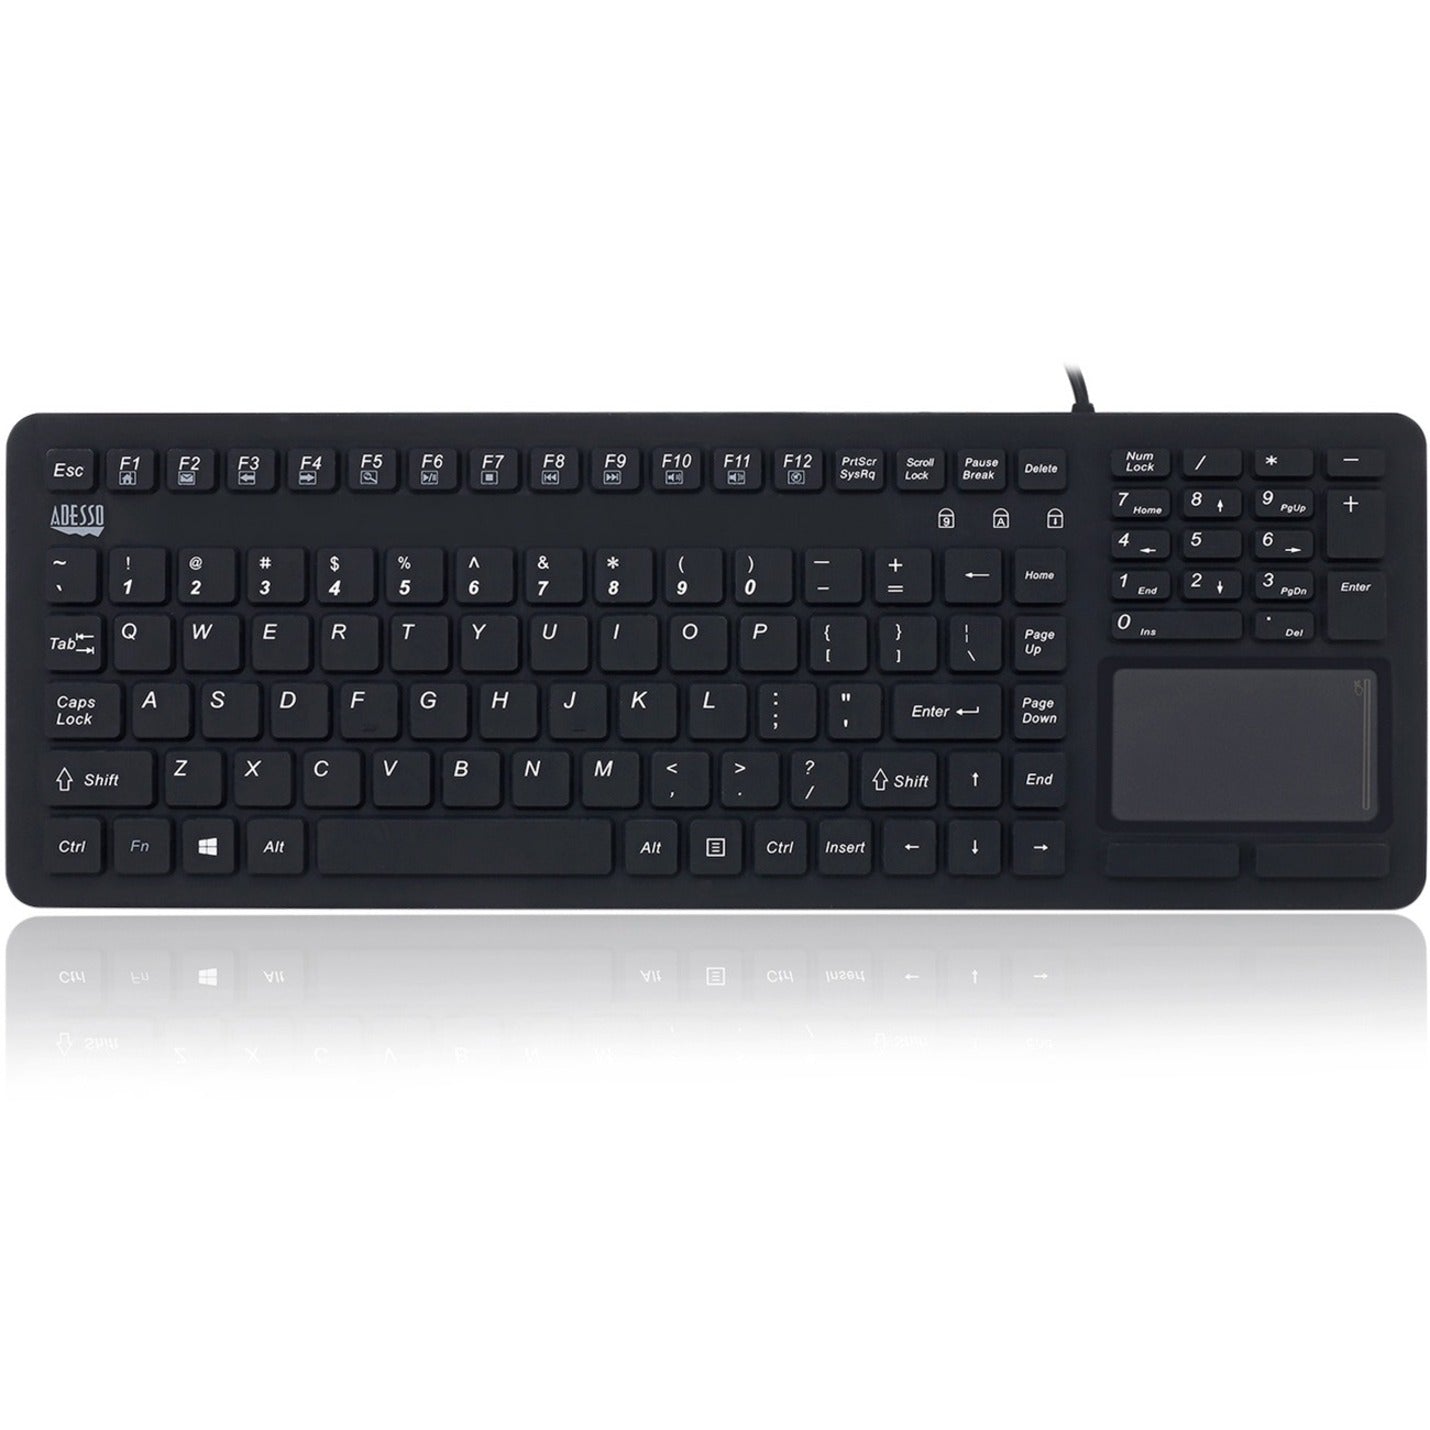 Adesso AKB-270UB Antimicrobial Waterproof Touchpad Keyboard, USB Cable, English (US) Layout